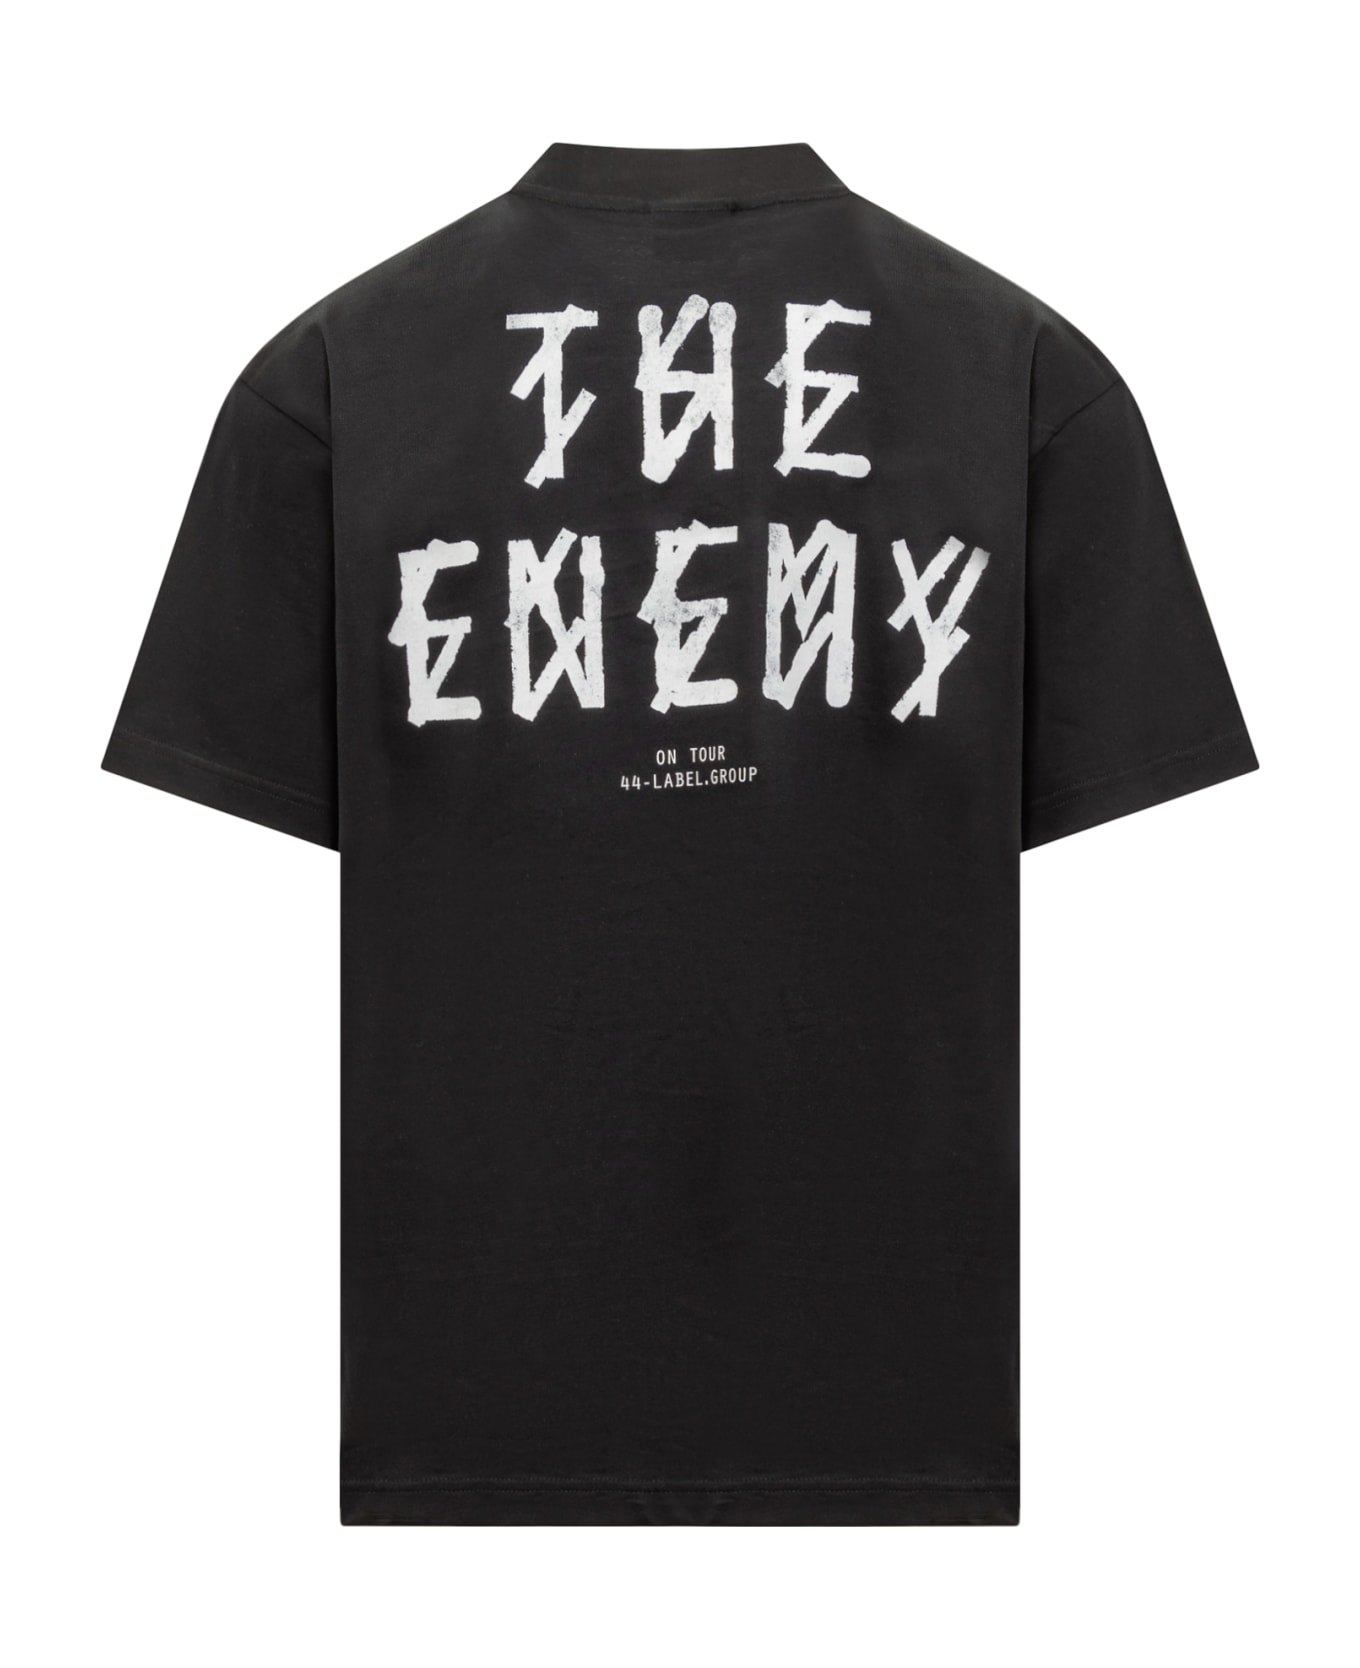 44 Label Group The Enemy T-shirt - BLACK-THE ENEMY PRINT シャツ